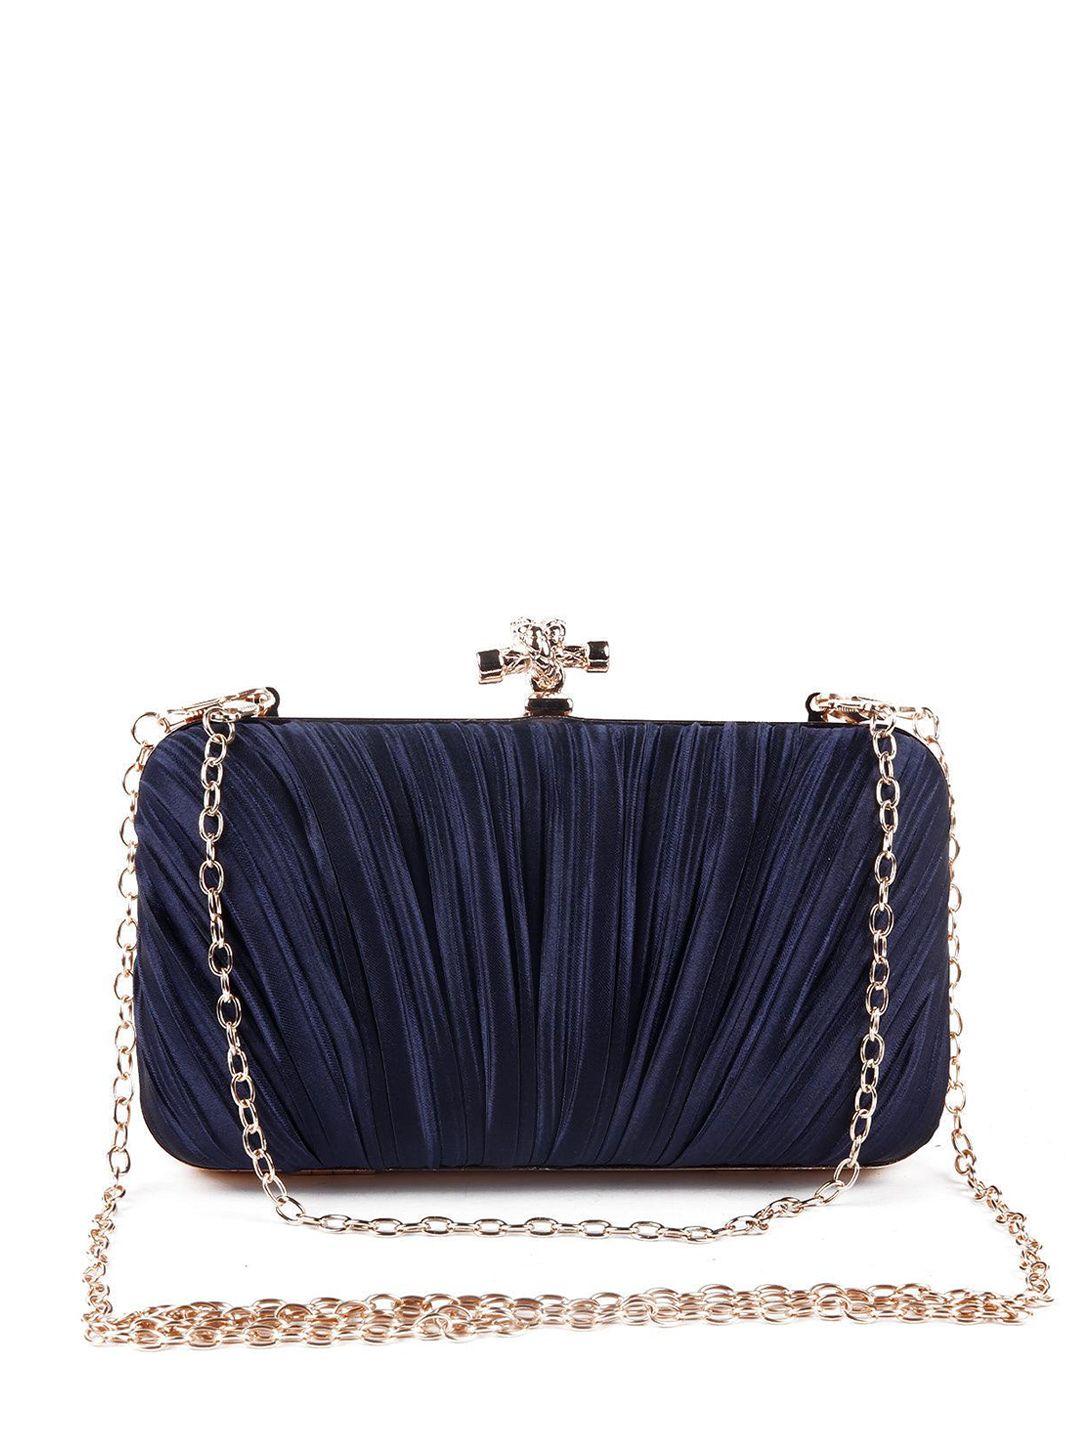 odette navy blue textured structured hobo bag with quilted